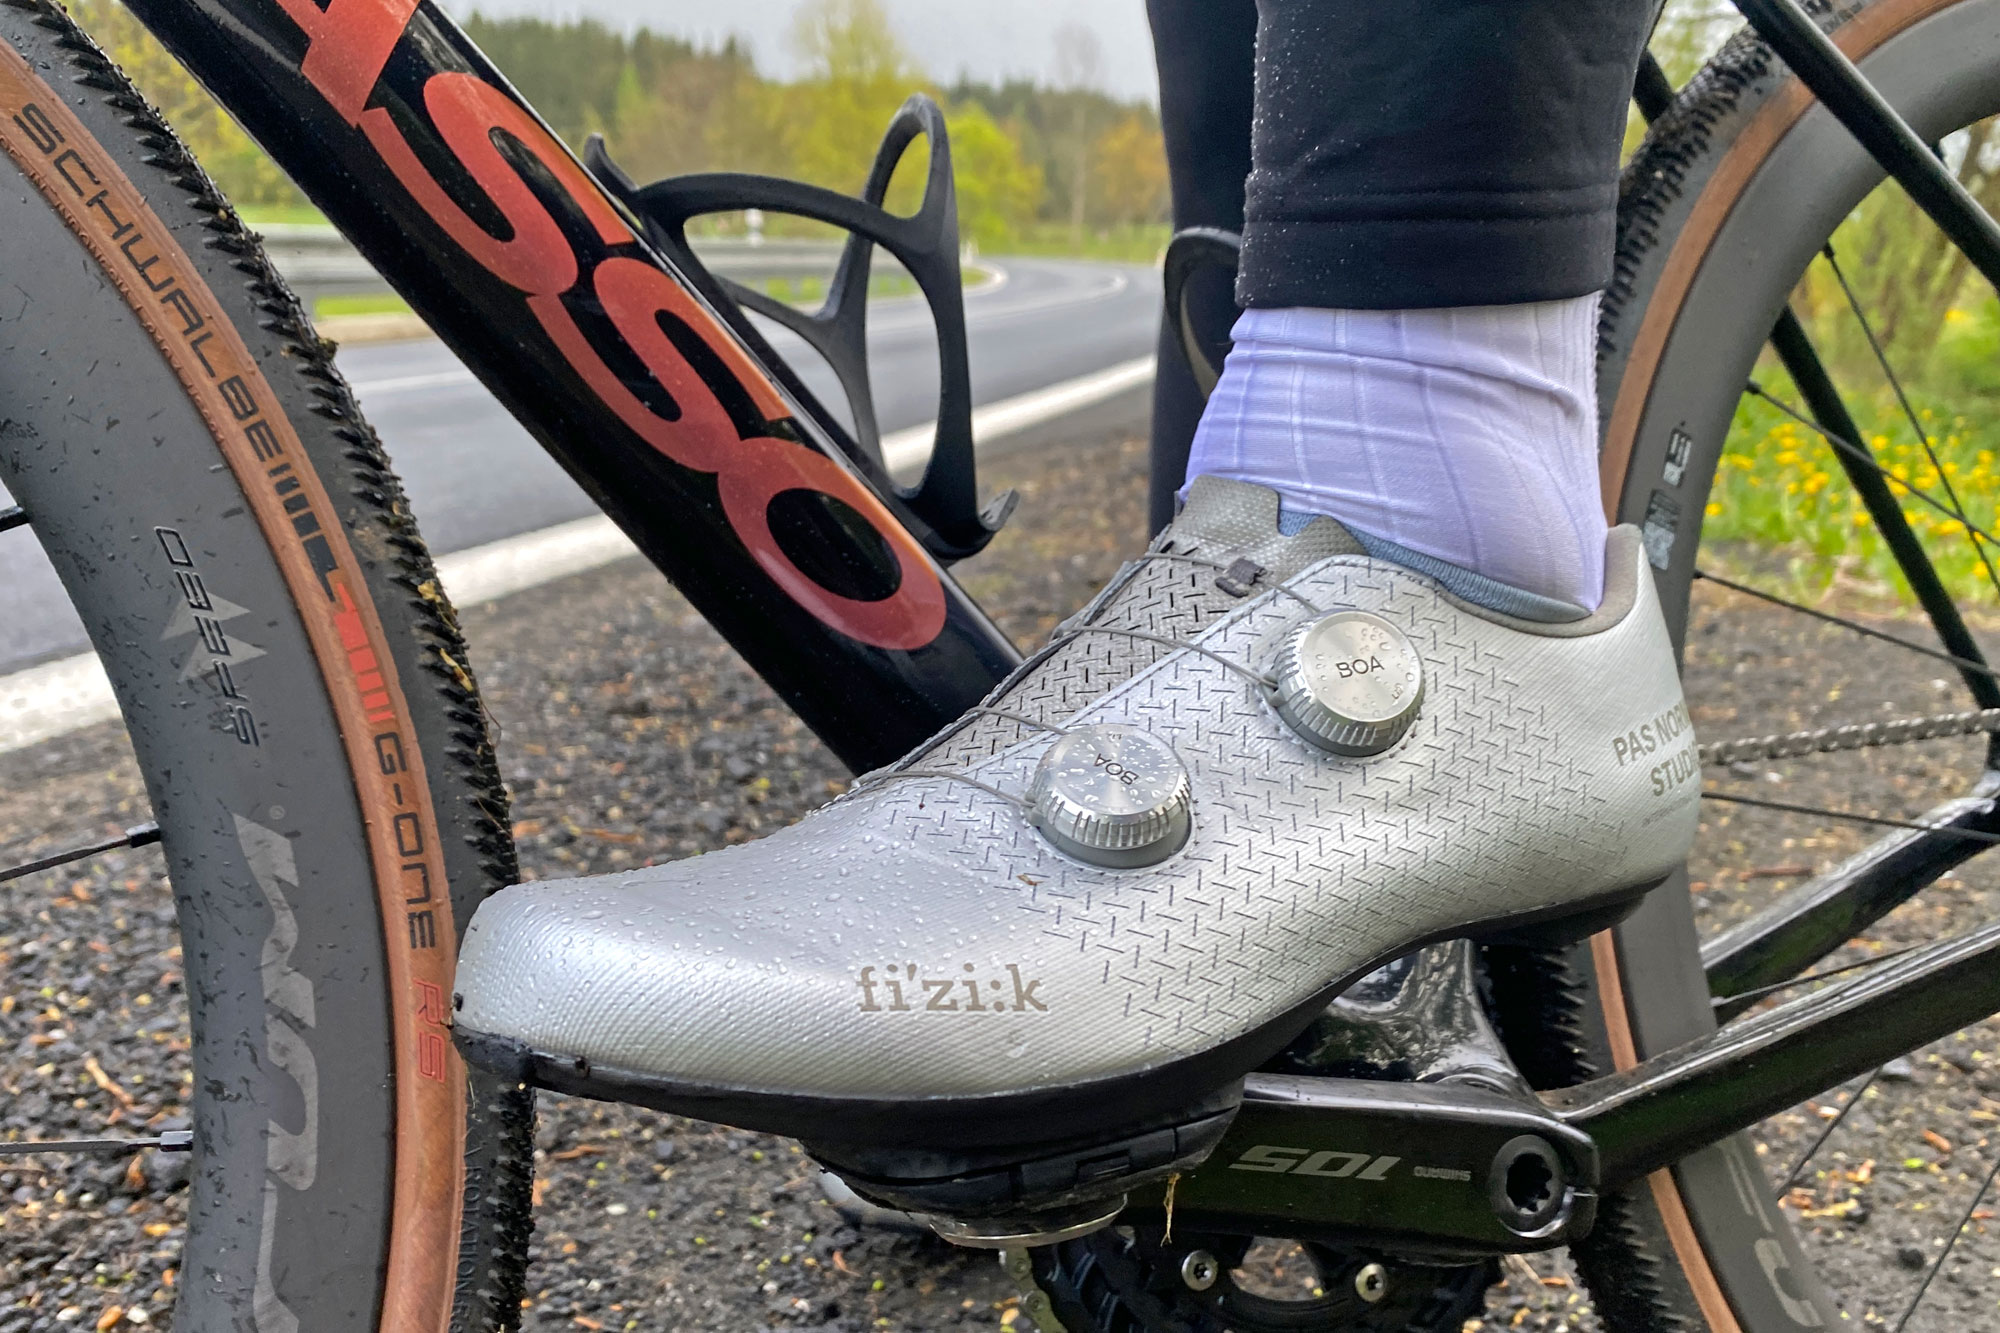 Pas Normal Mechanism x Fizik Carbon Road Shoe Collab Crafts Shiny Silver Slippers – Review